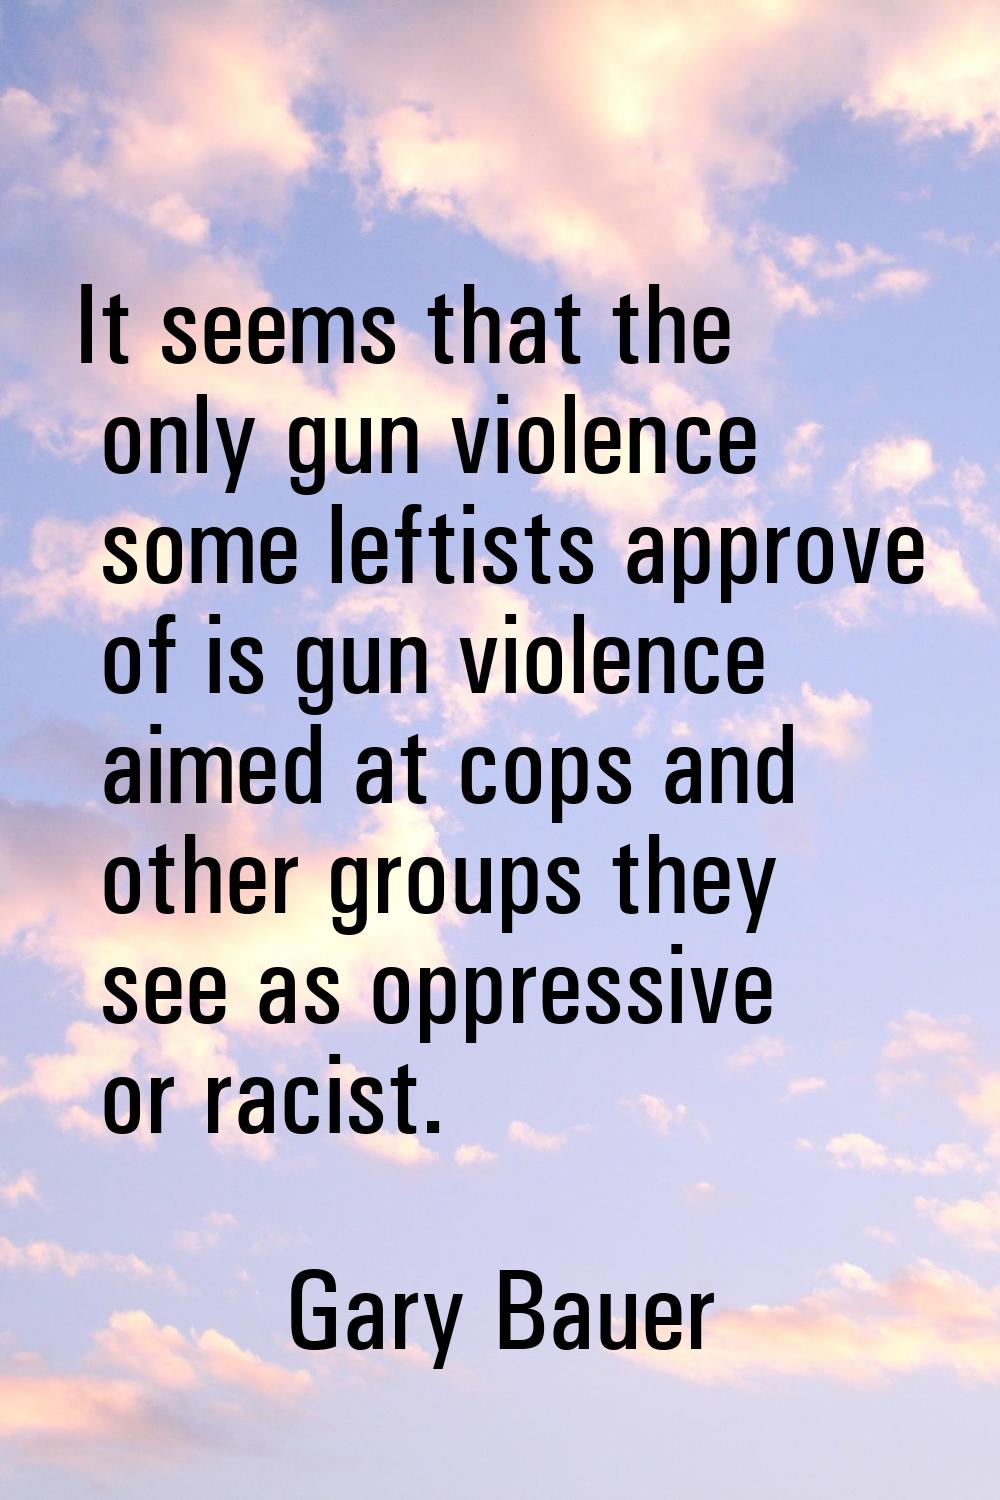 It seems that the only gun violence some leftists approve of is gun violence aimed at cops and othe